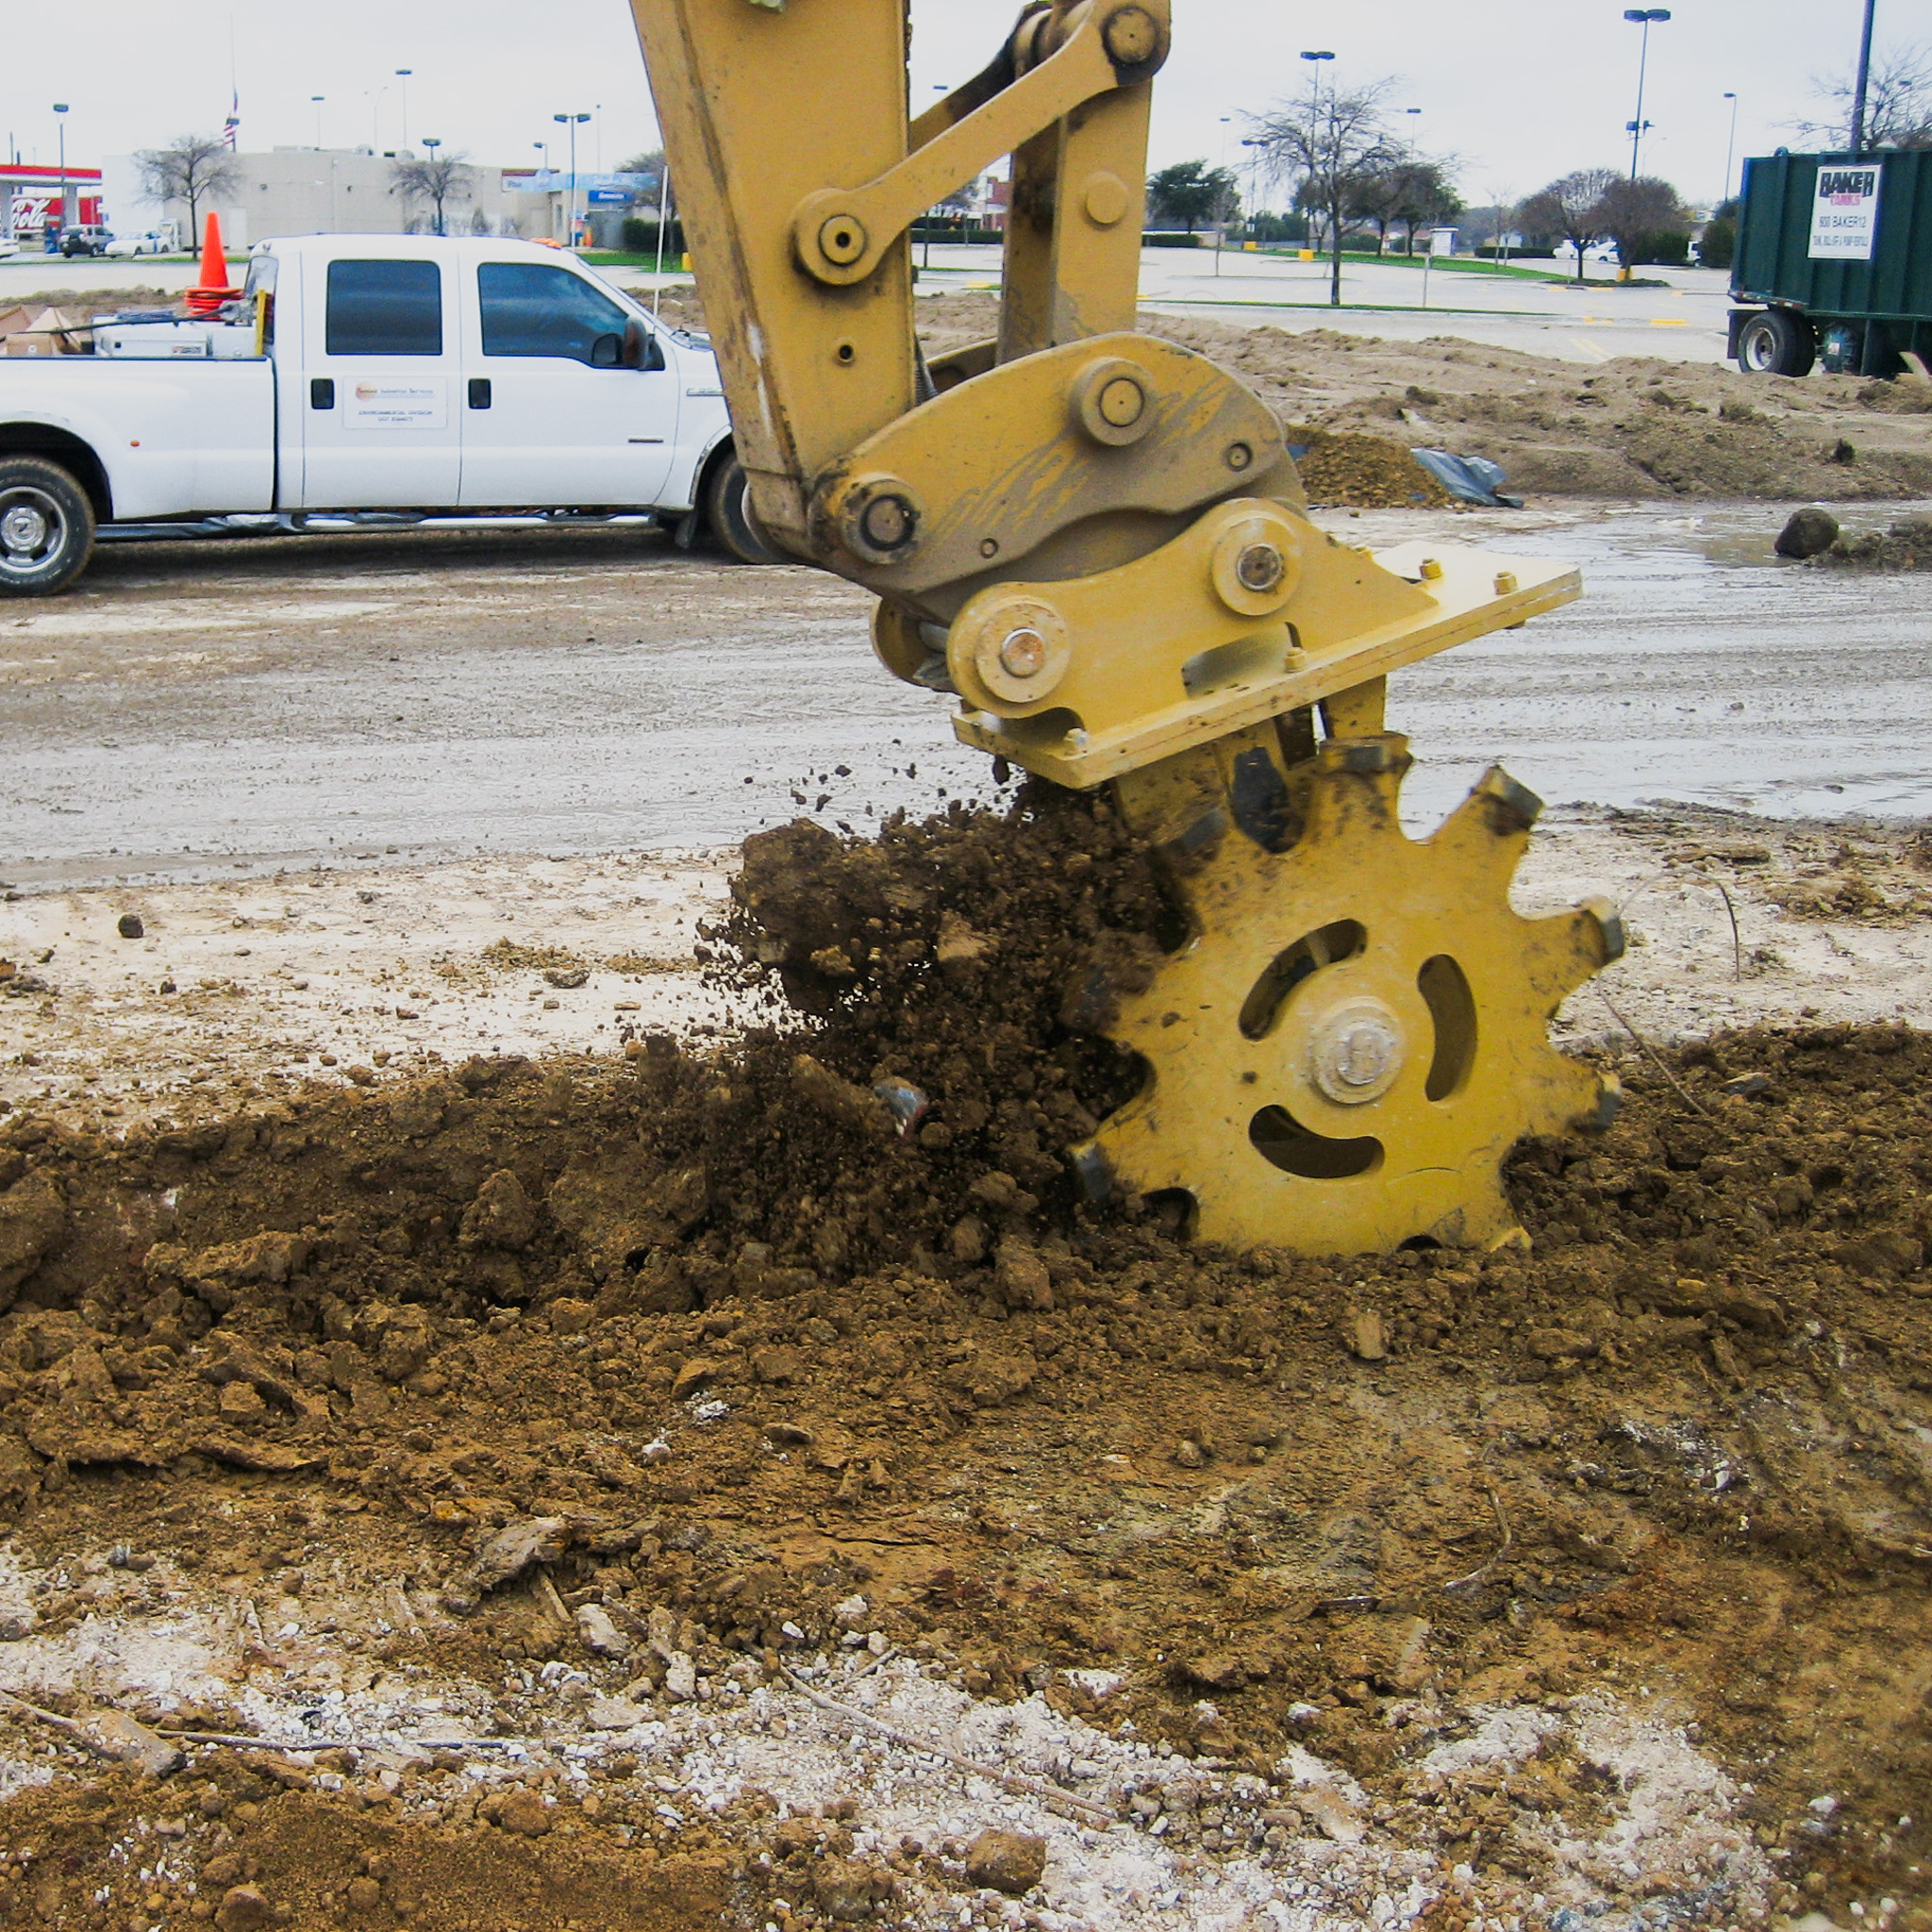 Excavator Compaction Wheel Tamper Foot for sale Tamping Dirt - Rockland Manufacturing